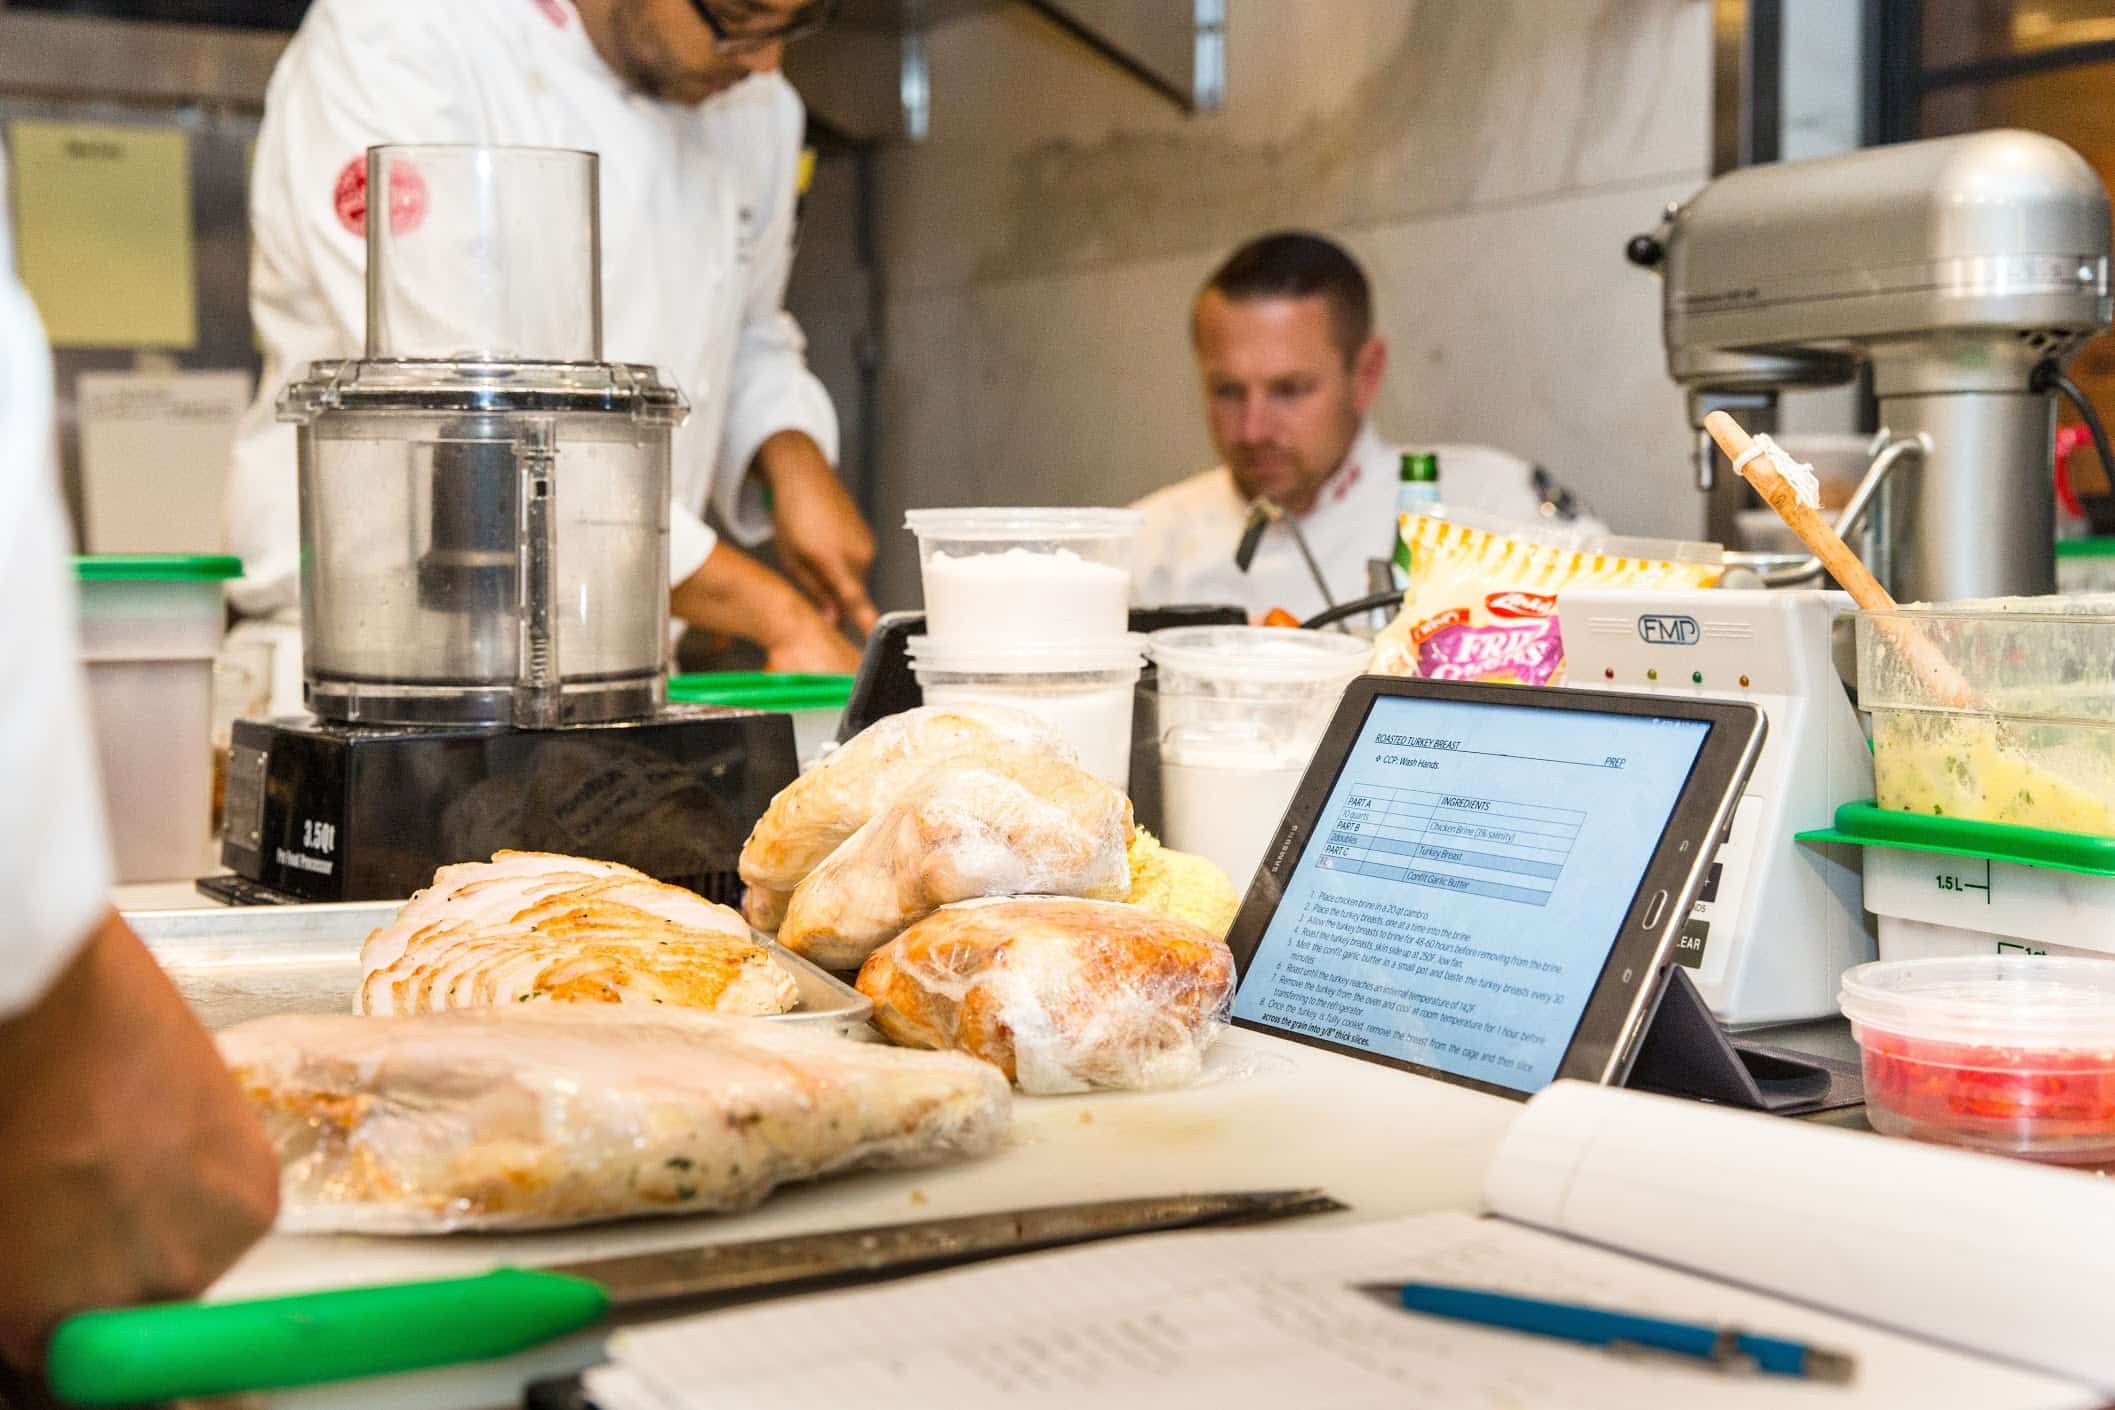 Earlsâ€™ chefs pulling recipes directly on their tablet devices with Google Apps